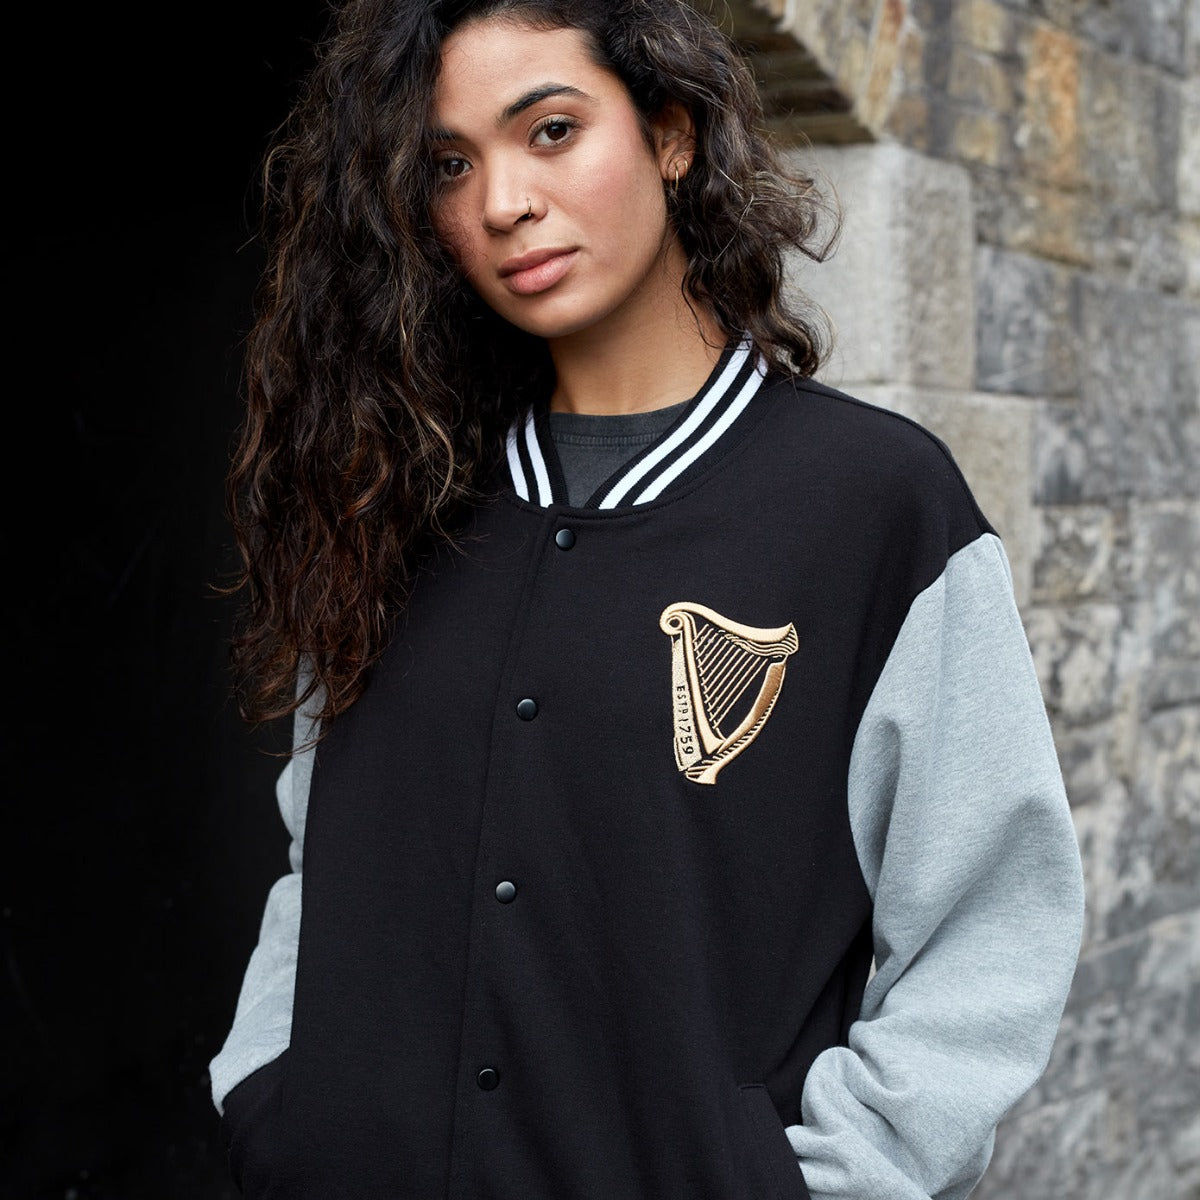 A woman wearing a Guinness black and gold varsity jacket.